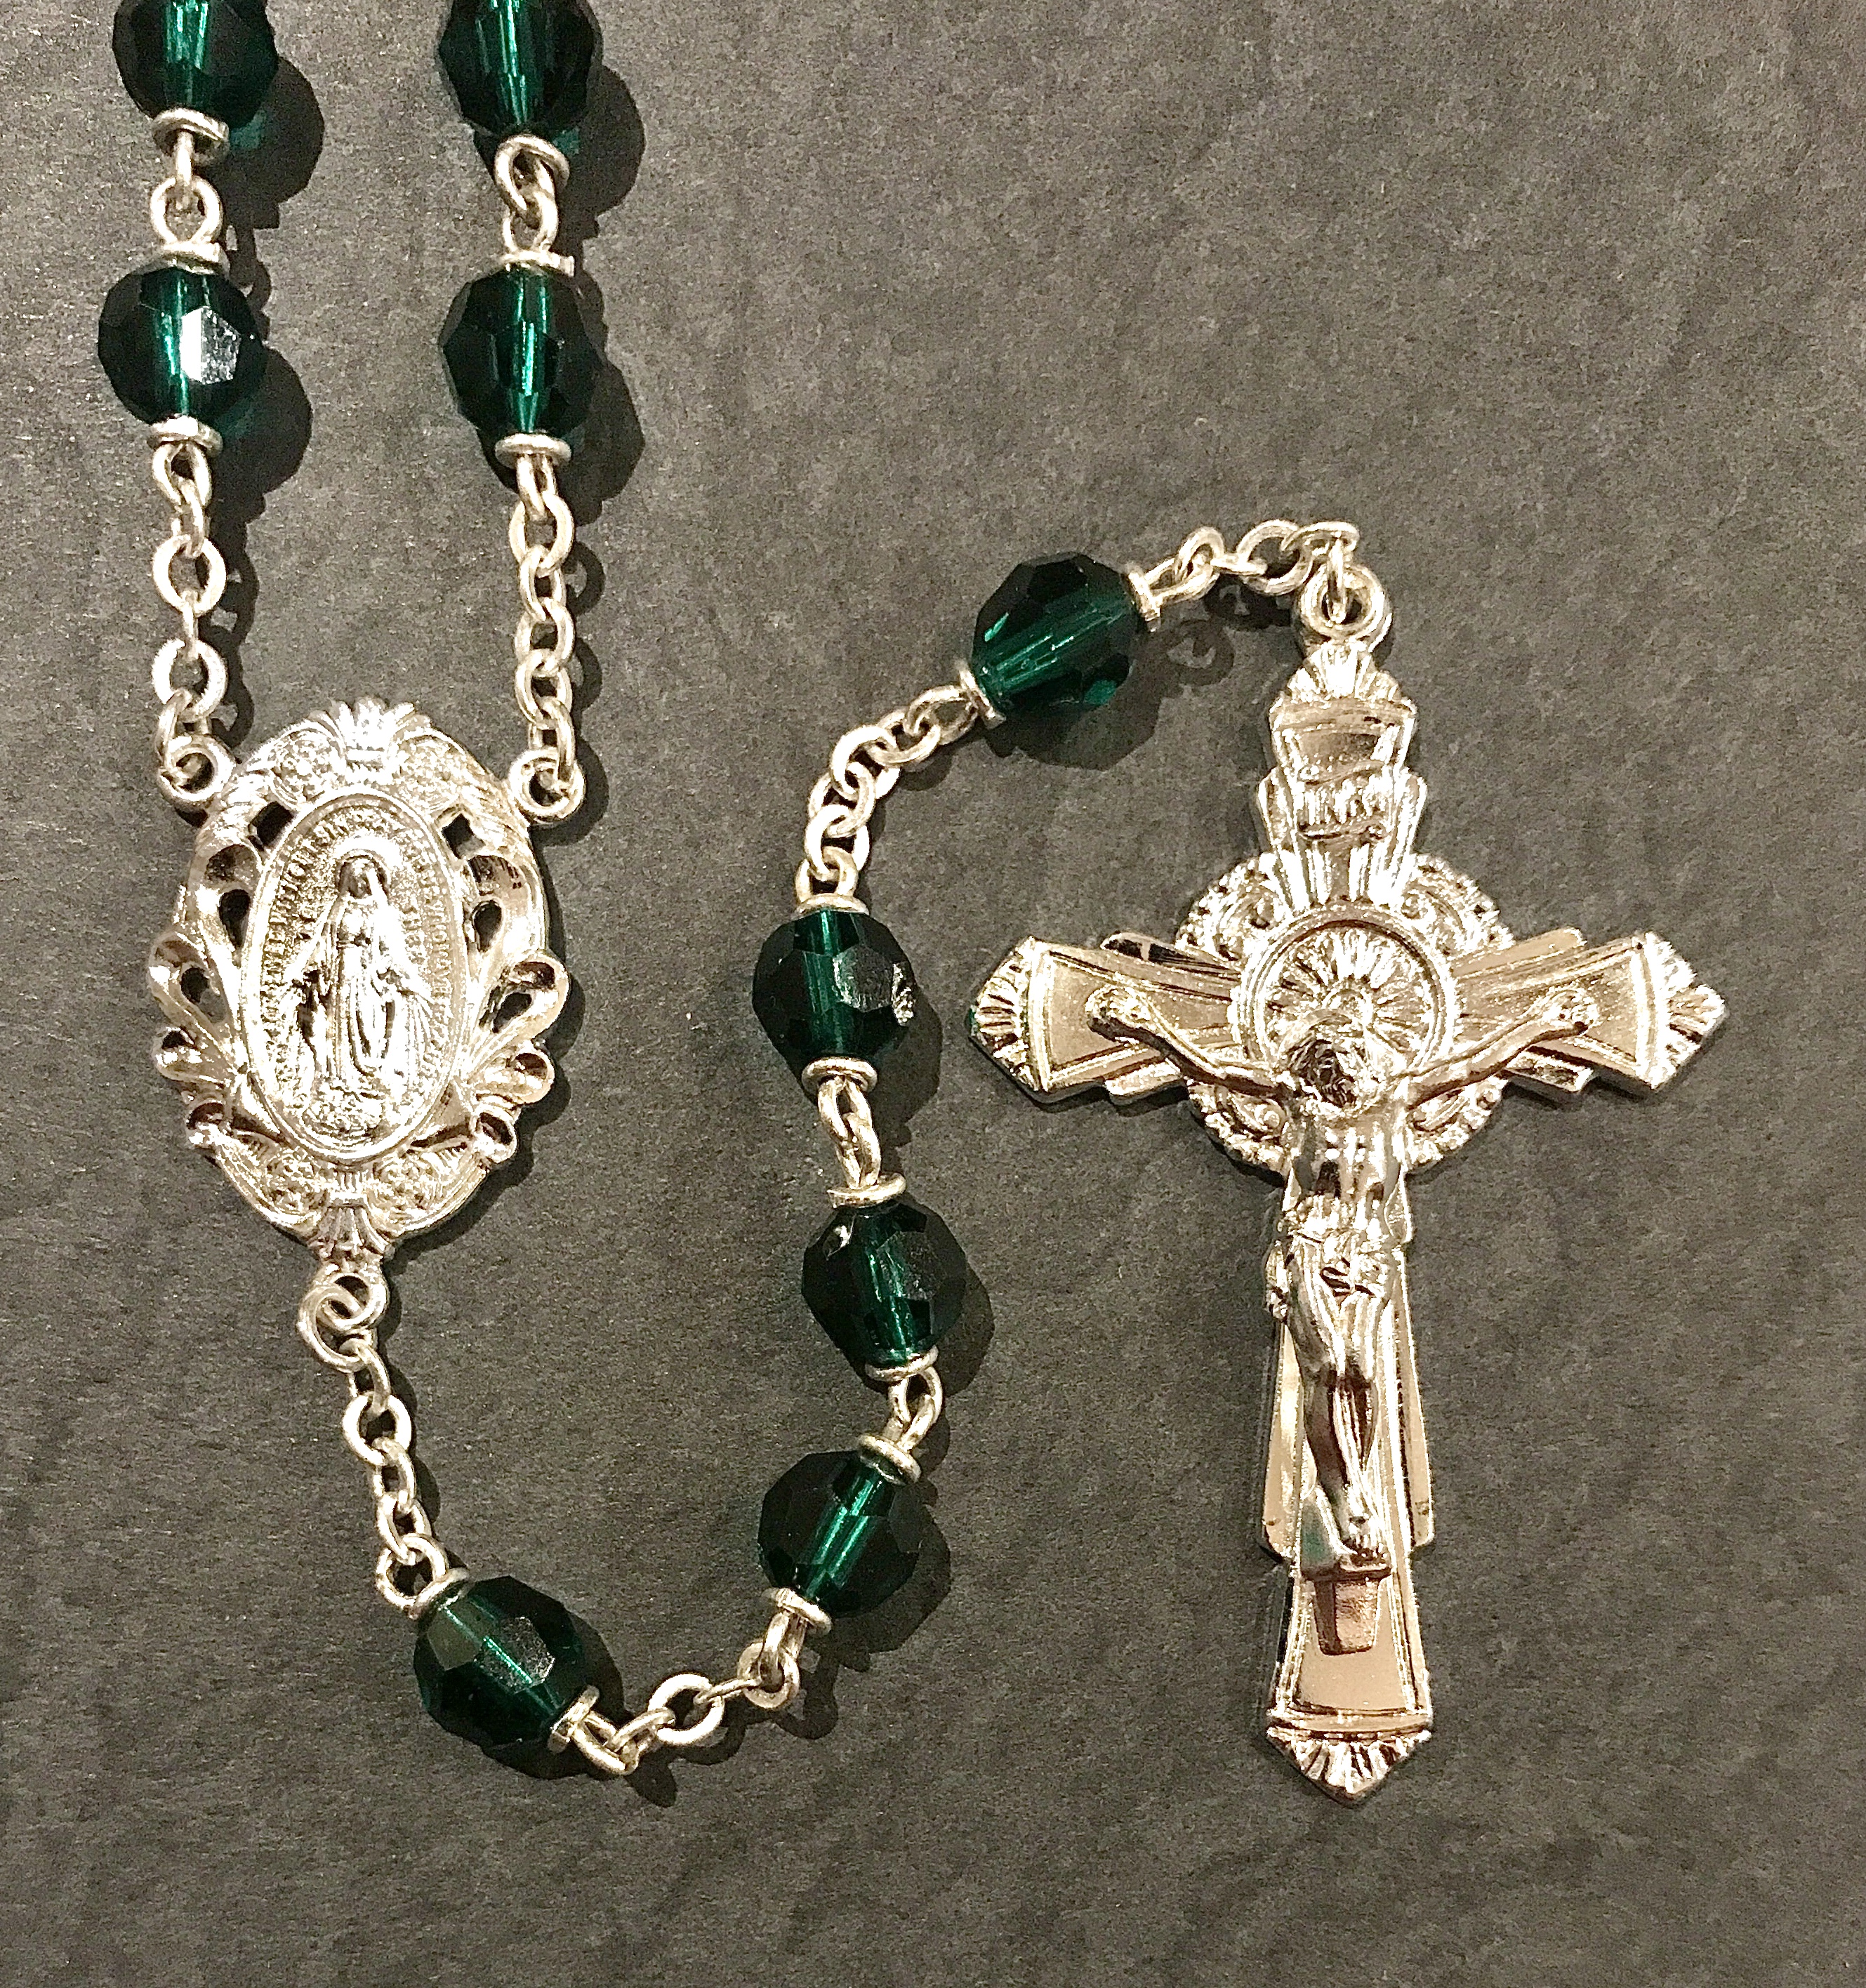 6mm EMERALD TIN CUT LOC-LINK ROSARY WITH STERLING SILVER PLATED CRUCIFIX, CENTER, WIRE, CHAIN GIFT BOXED